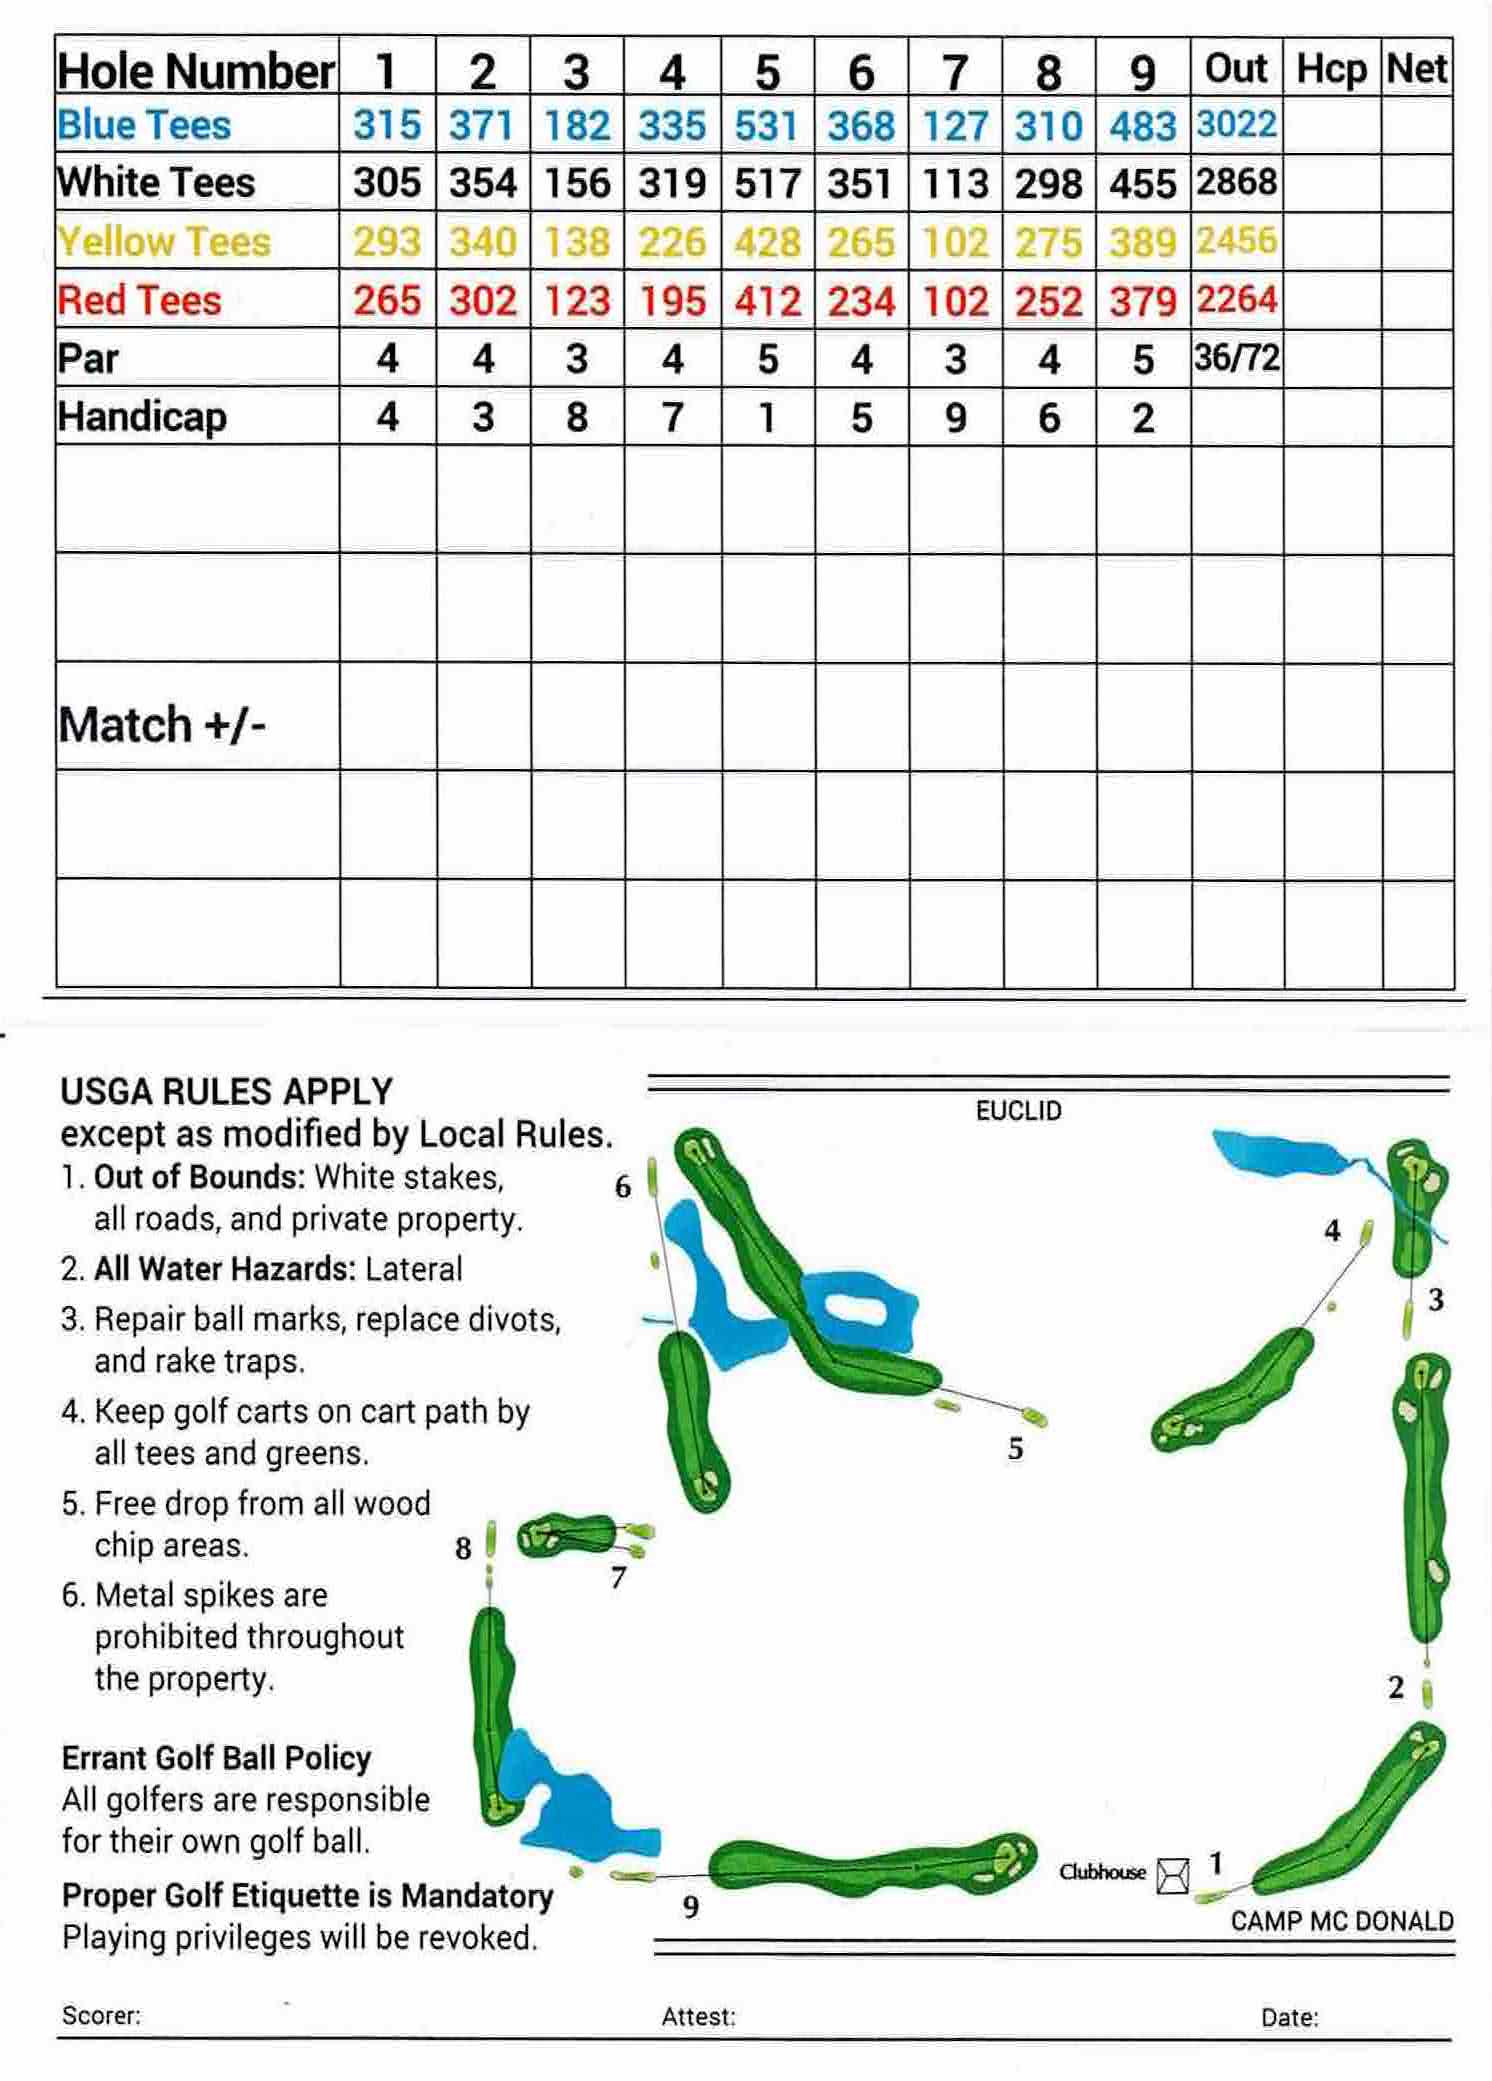 Scan of the scorecard from Rob Roy Golf Course in Prospect Heights, Illinois. 